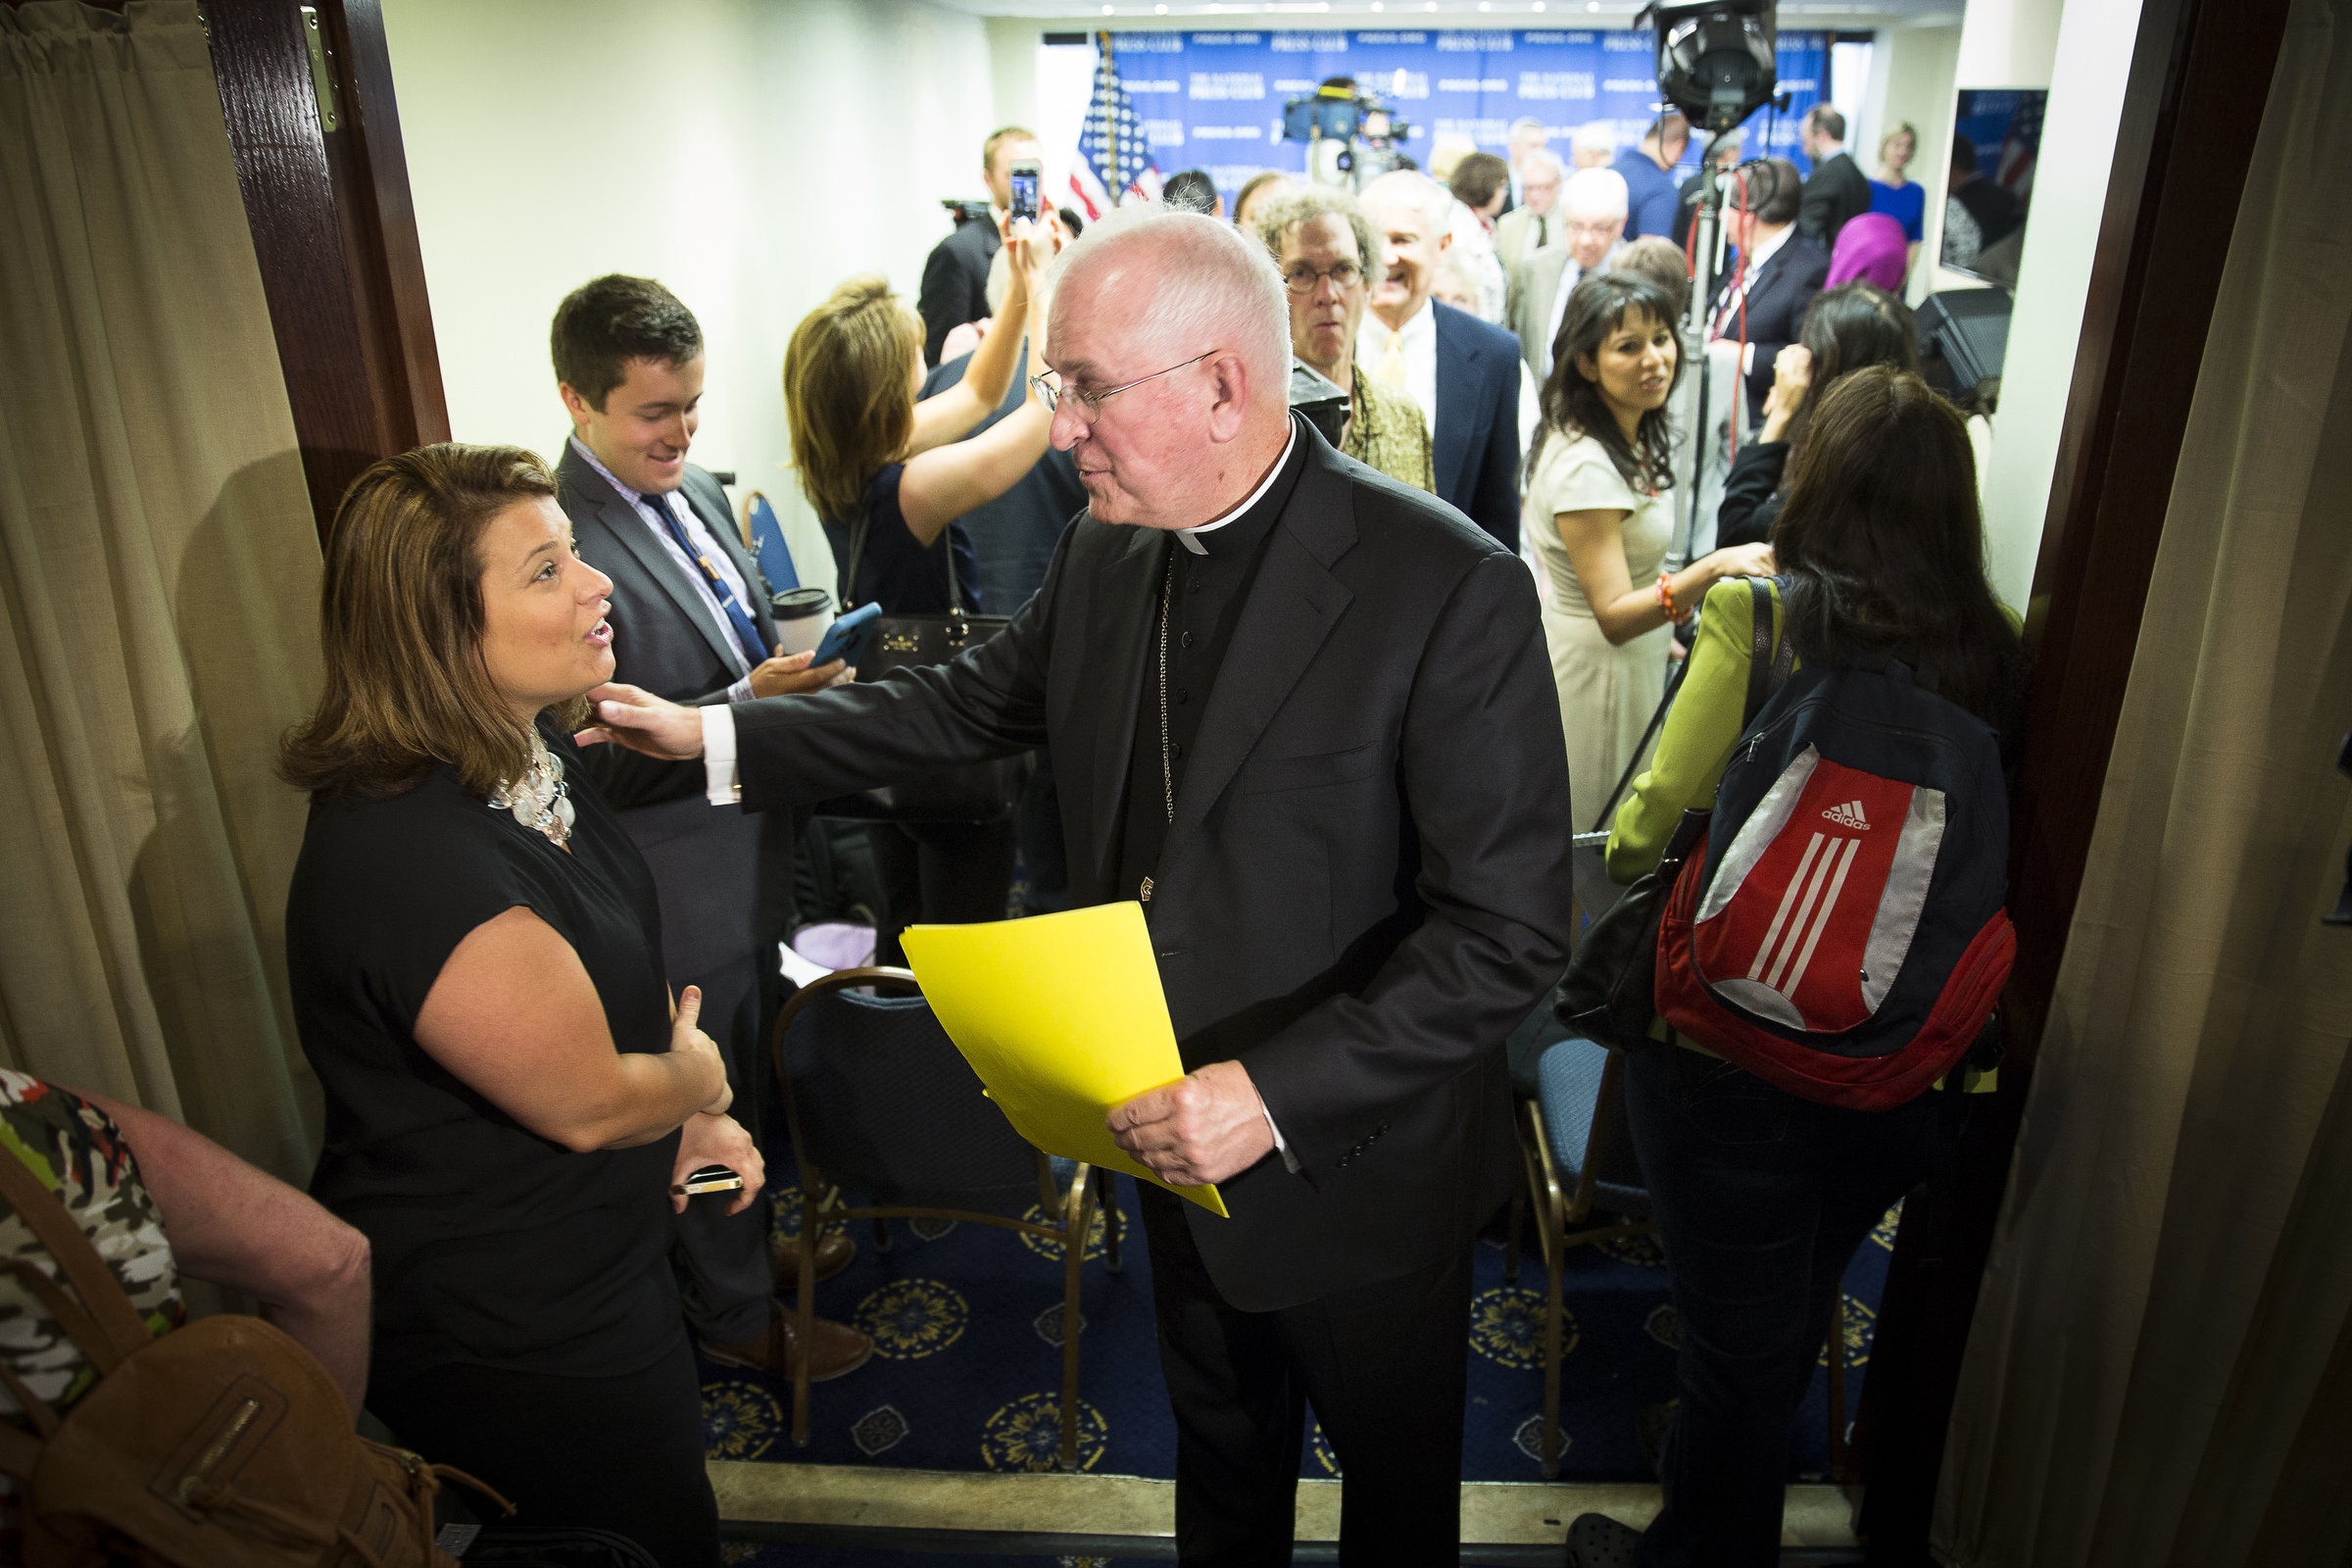 Archbishop Joseph Kurtz of Louisville, Ky., president of the U.S. Conference of Catholic Bishops, departs the National Press Club in Washington June 18 after a news conference on Pope Francis' environmental encyclical. (CNS/Tyler Orsburn) 